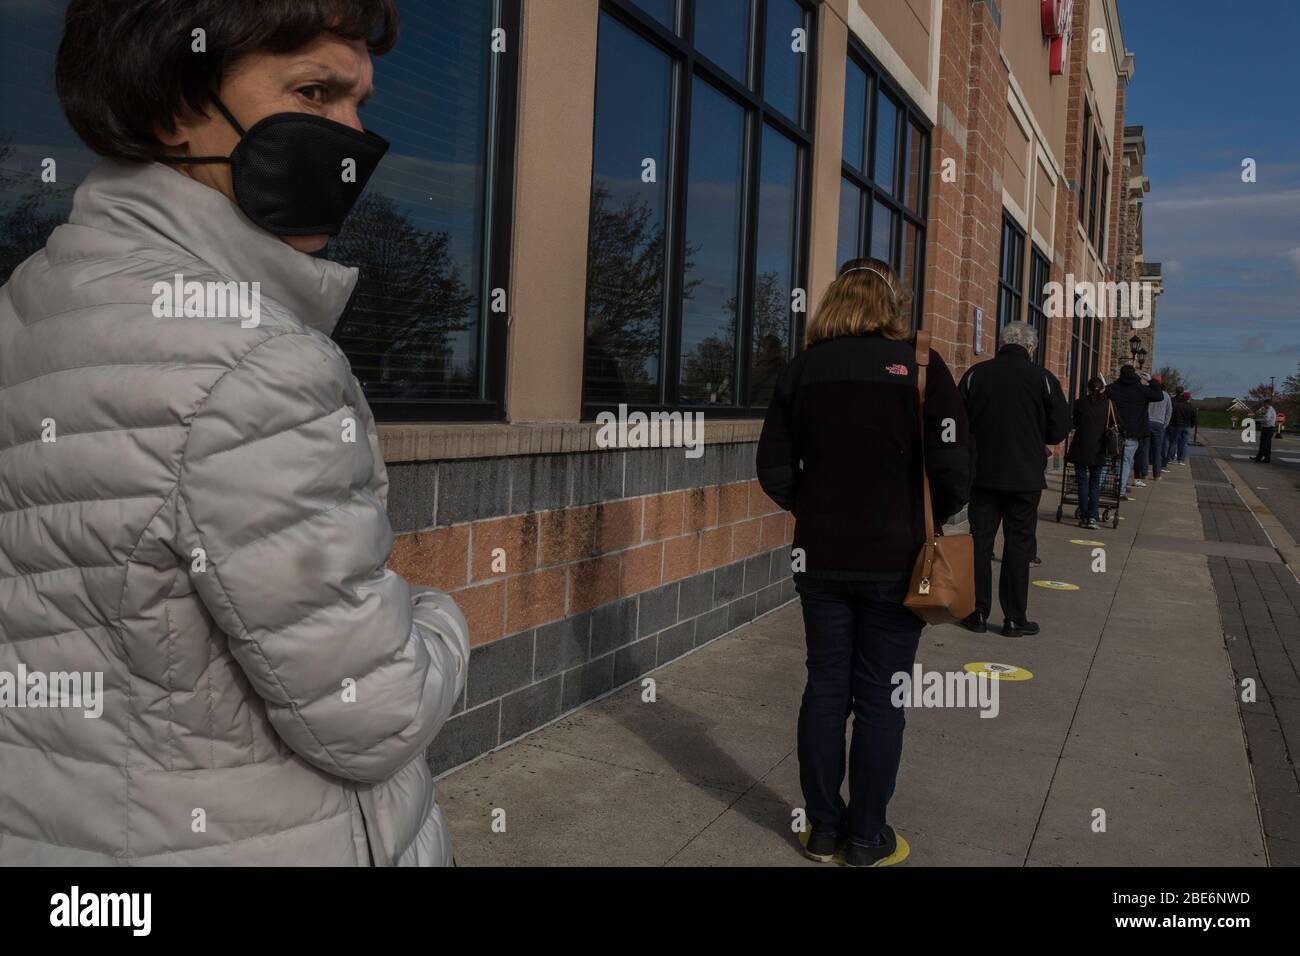 Covid-19, long line of face-masked people waiting to enter a food market in suburban Philadelphia, PA, April 11, 2020 Stock Photo